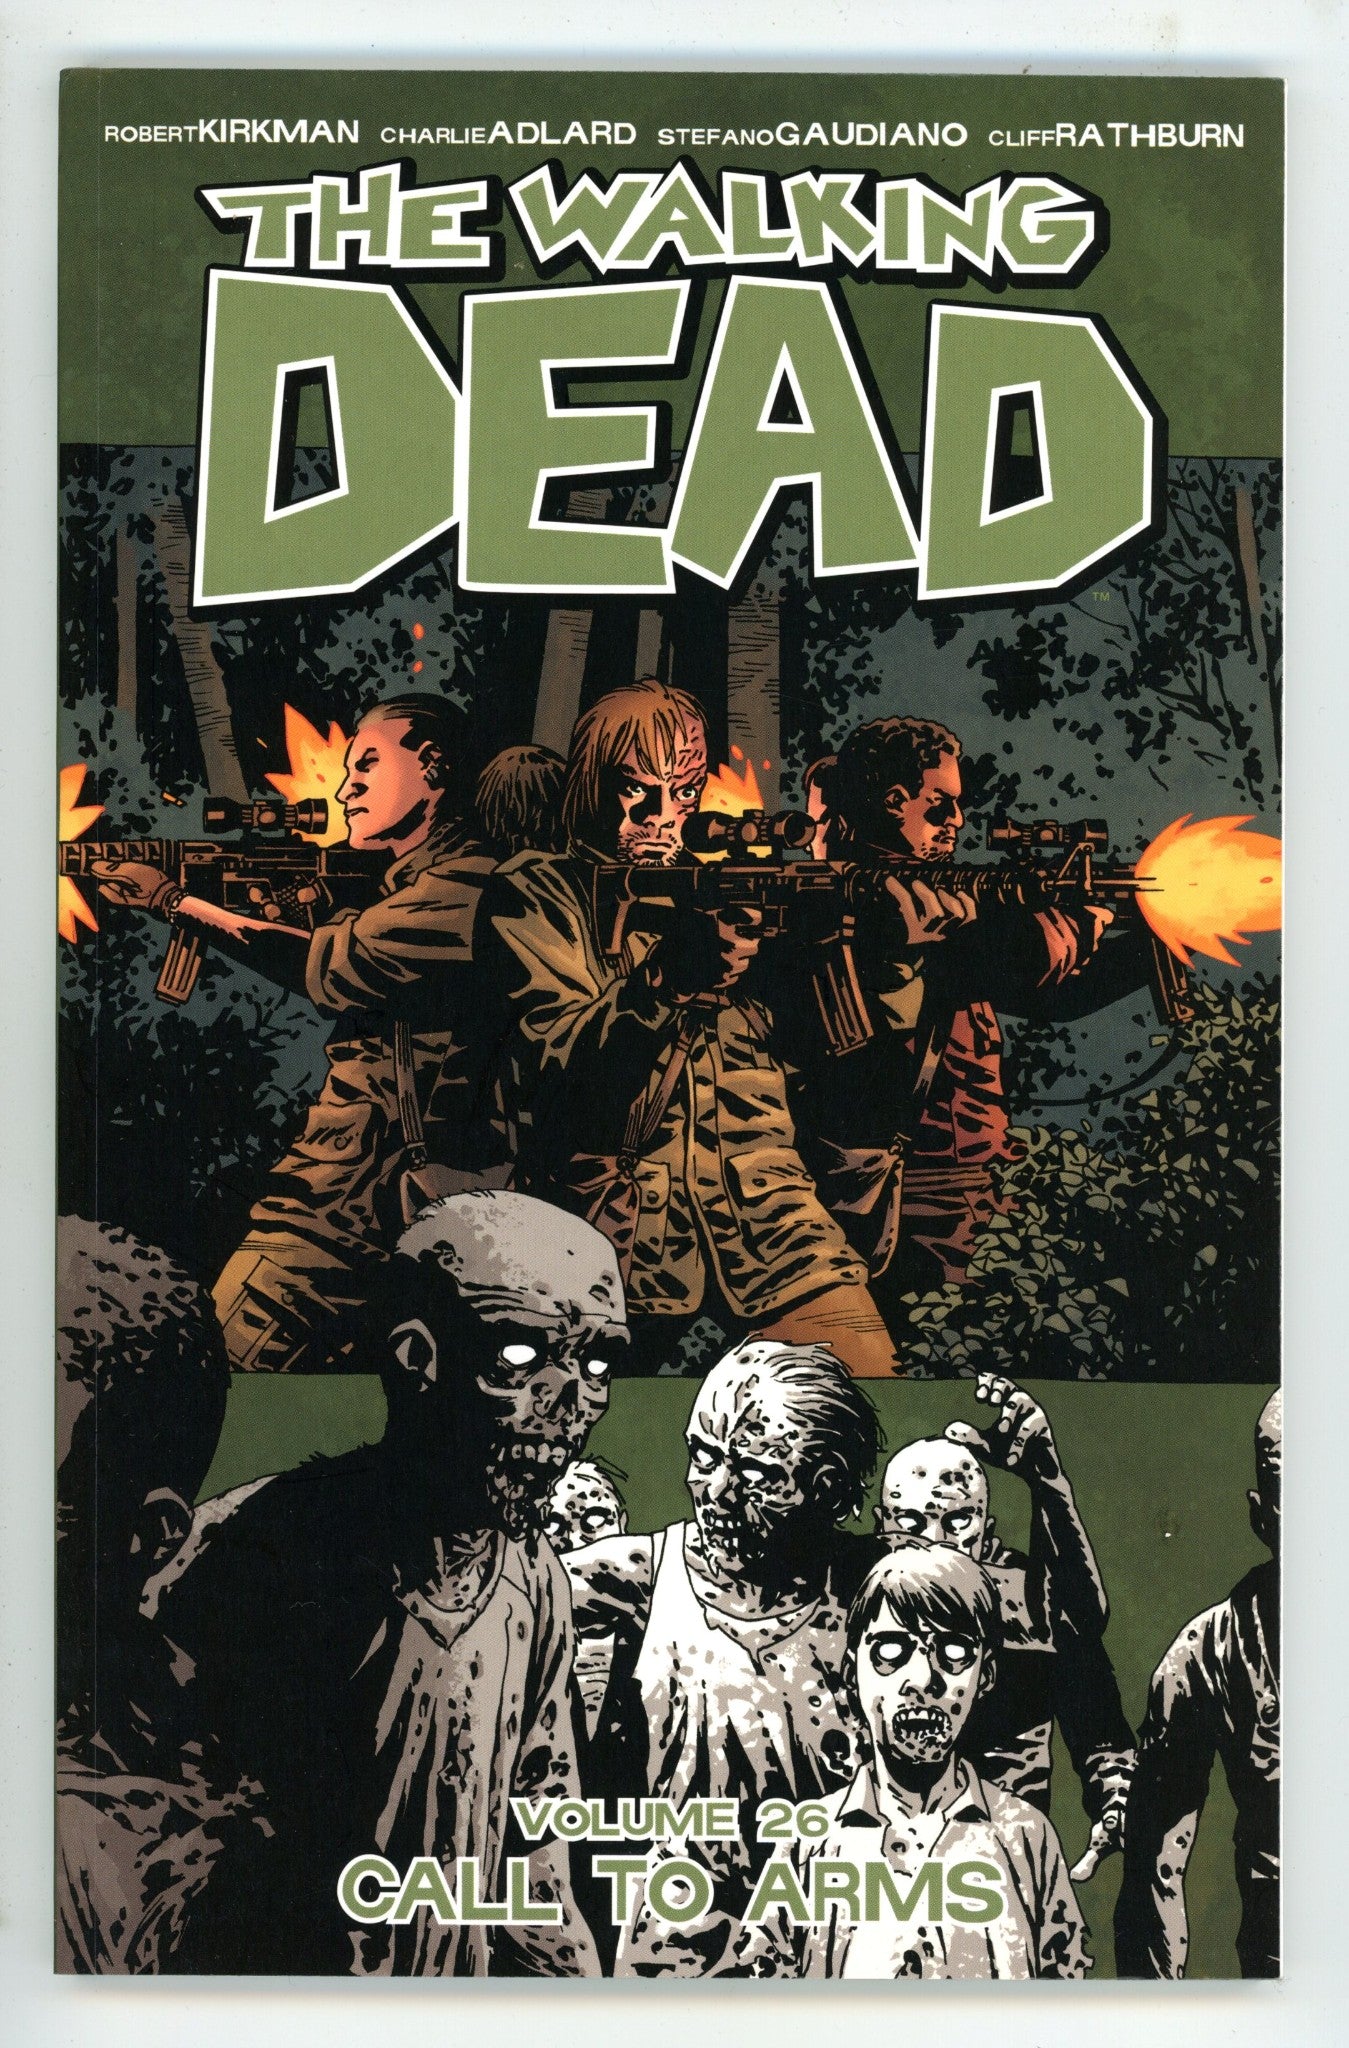 The Walking Dead Vol 26 Call to Arms TPB